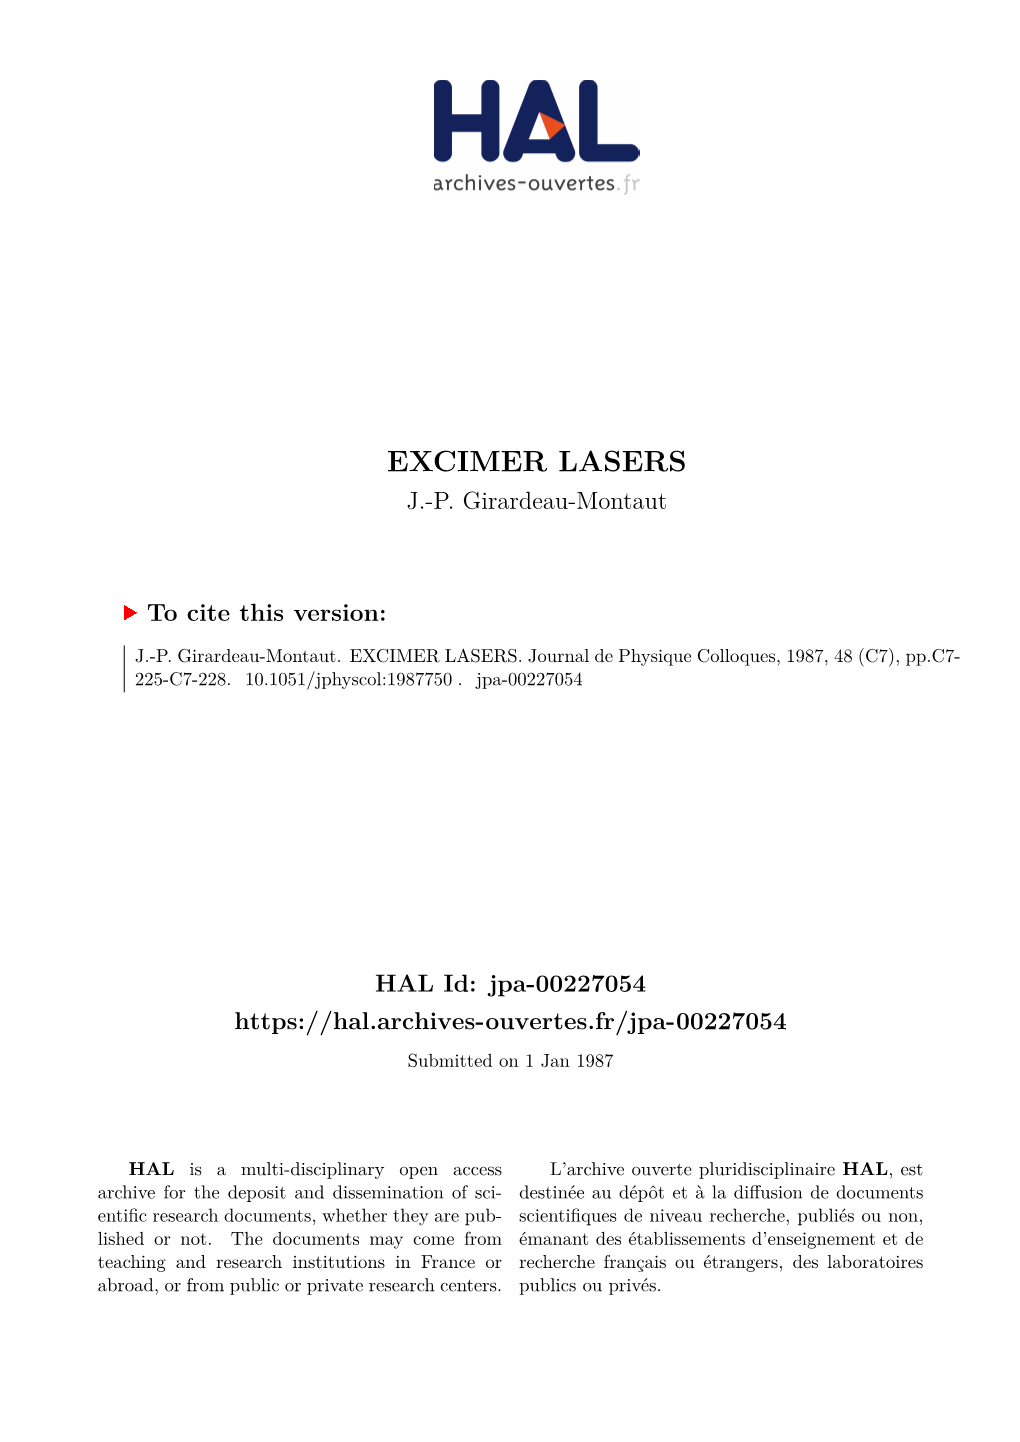 Excimer Lasers J.-P